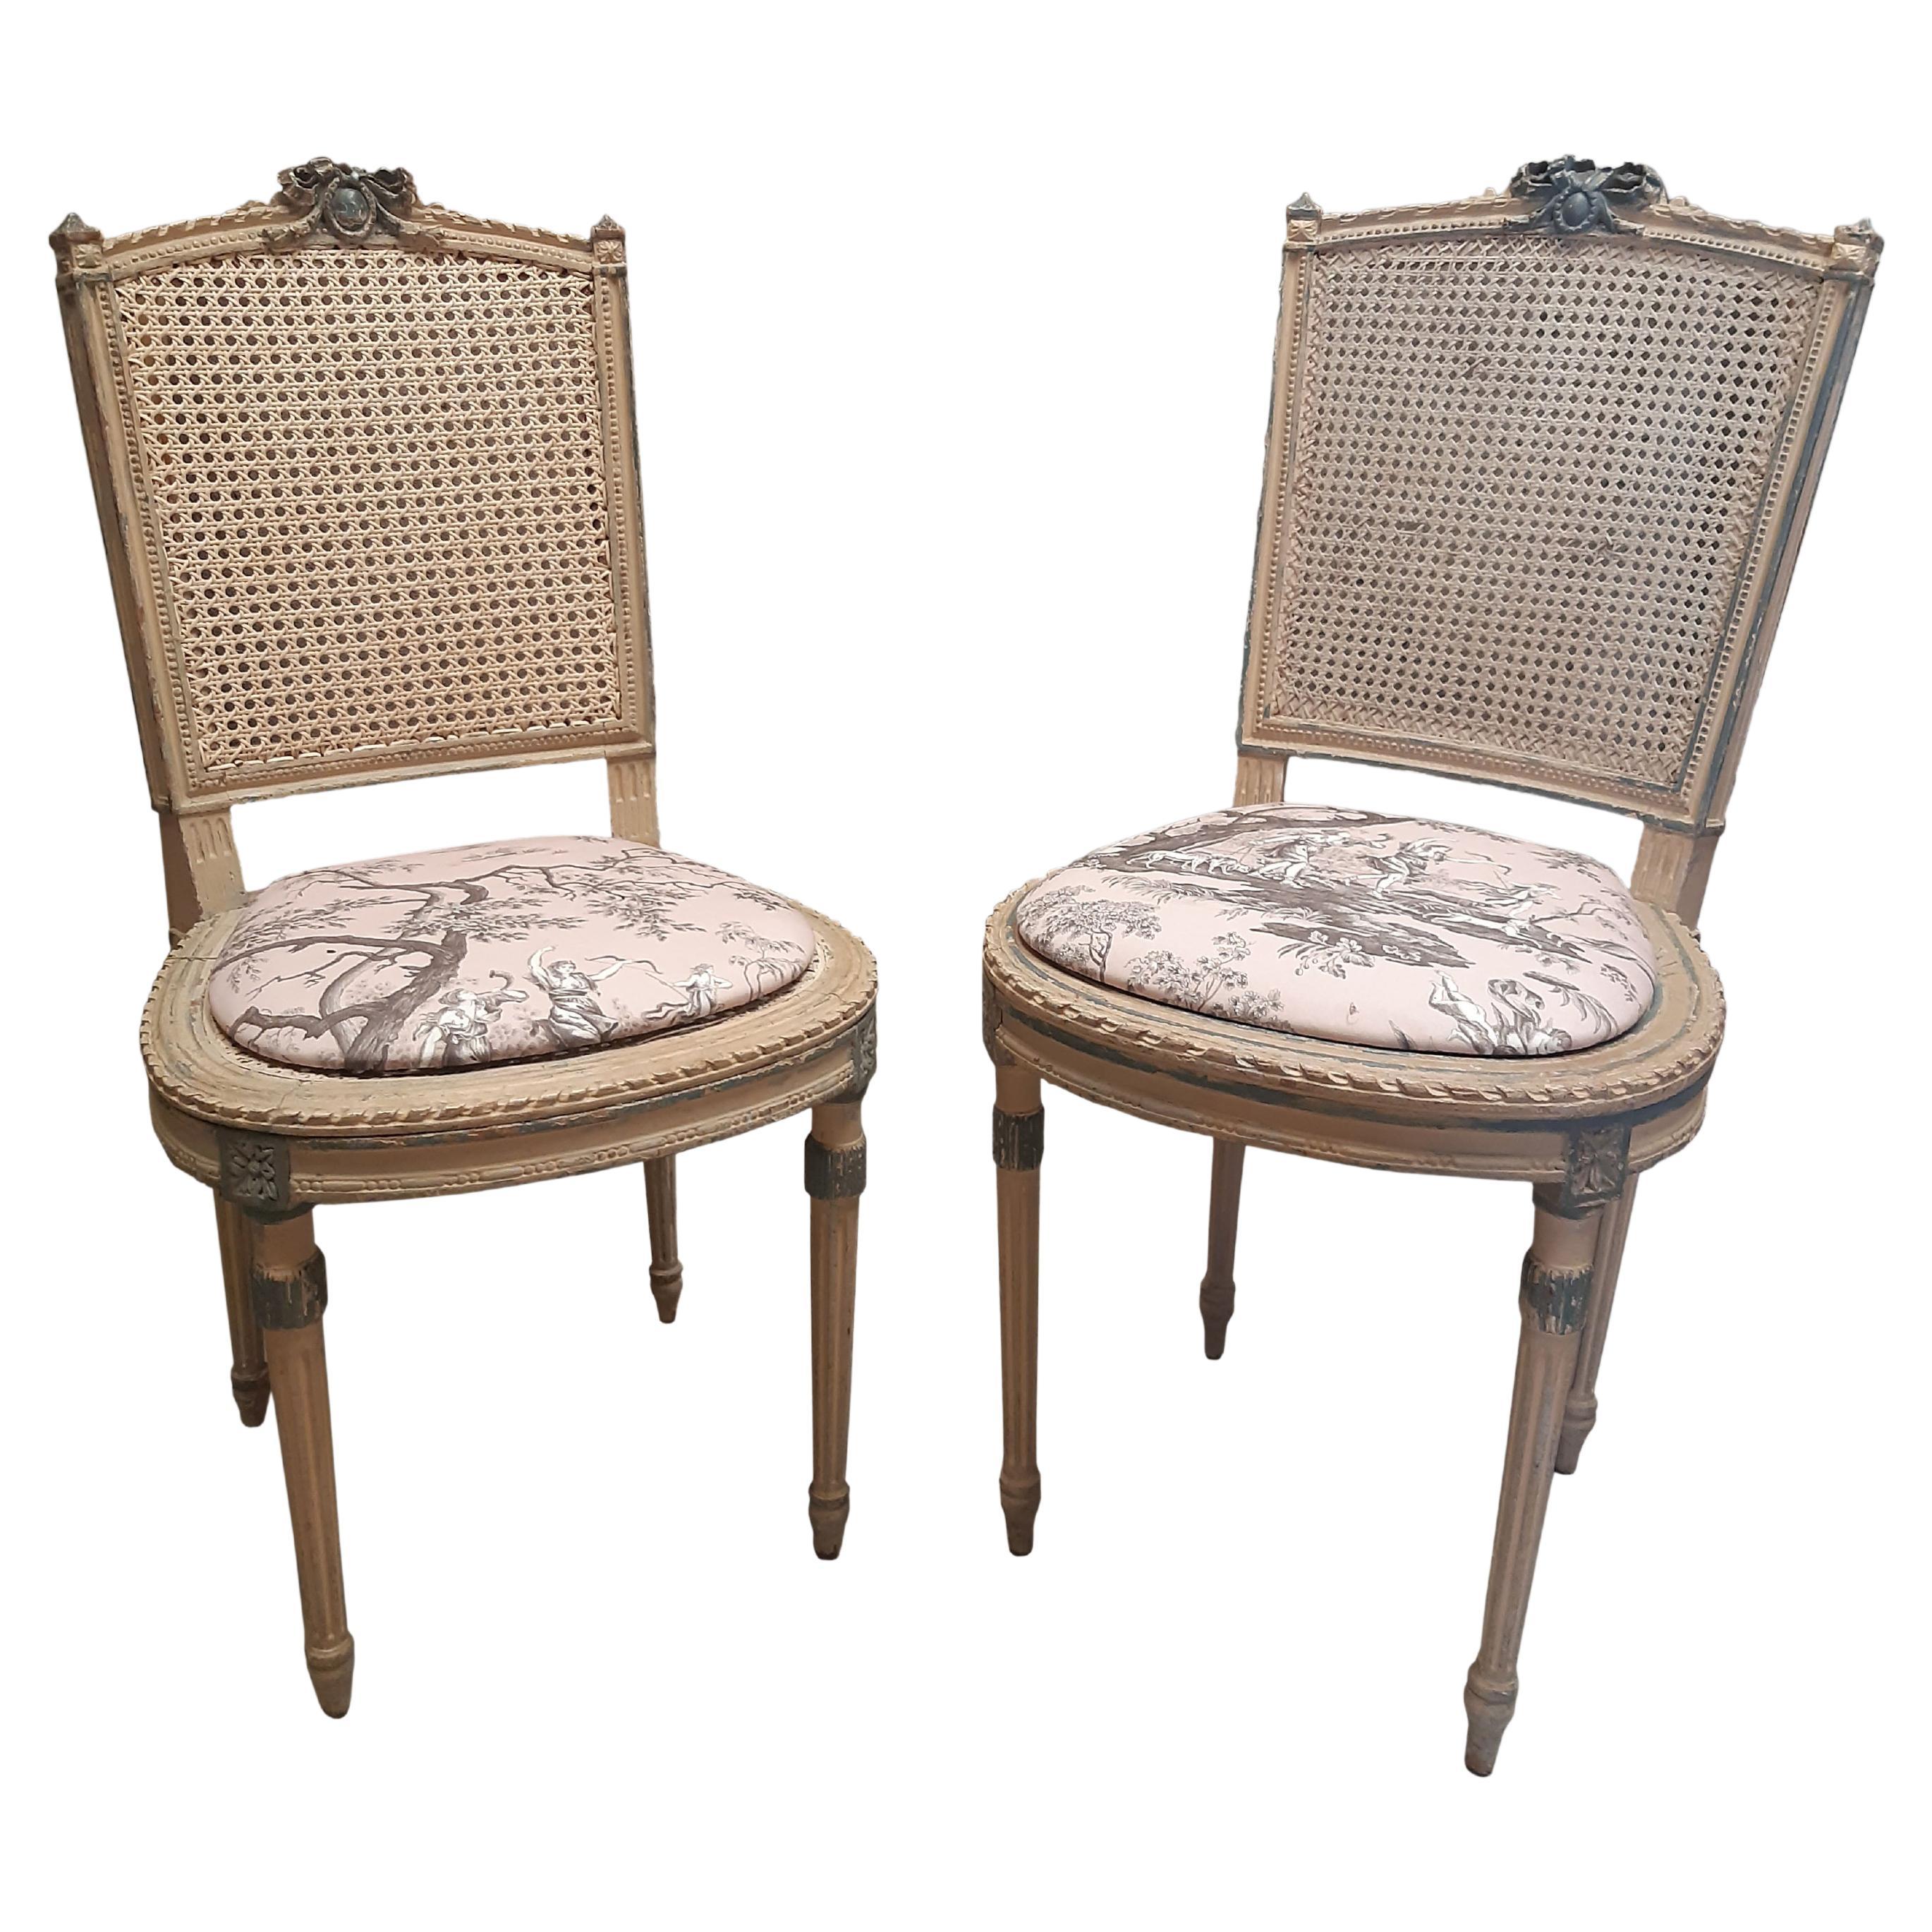 Pair of Louis XVI Chairs with Seat in Pink Toile De Jouy Cane Back Rest Ribbon